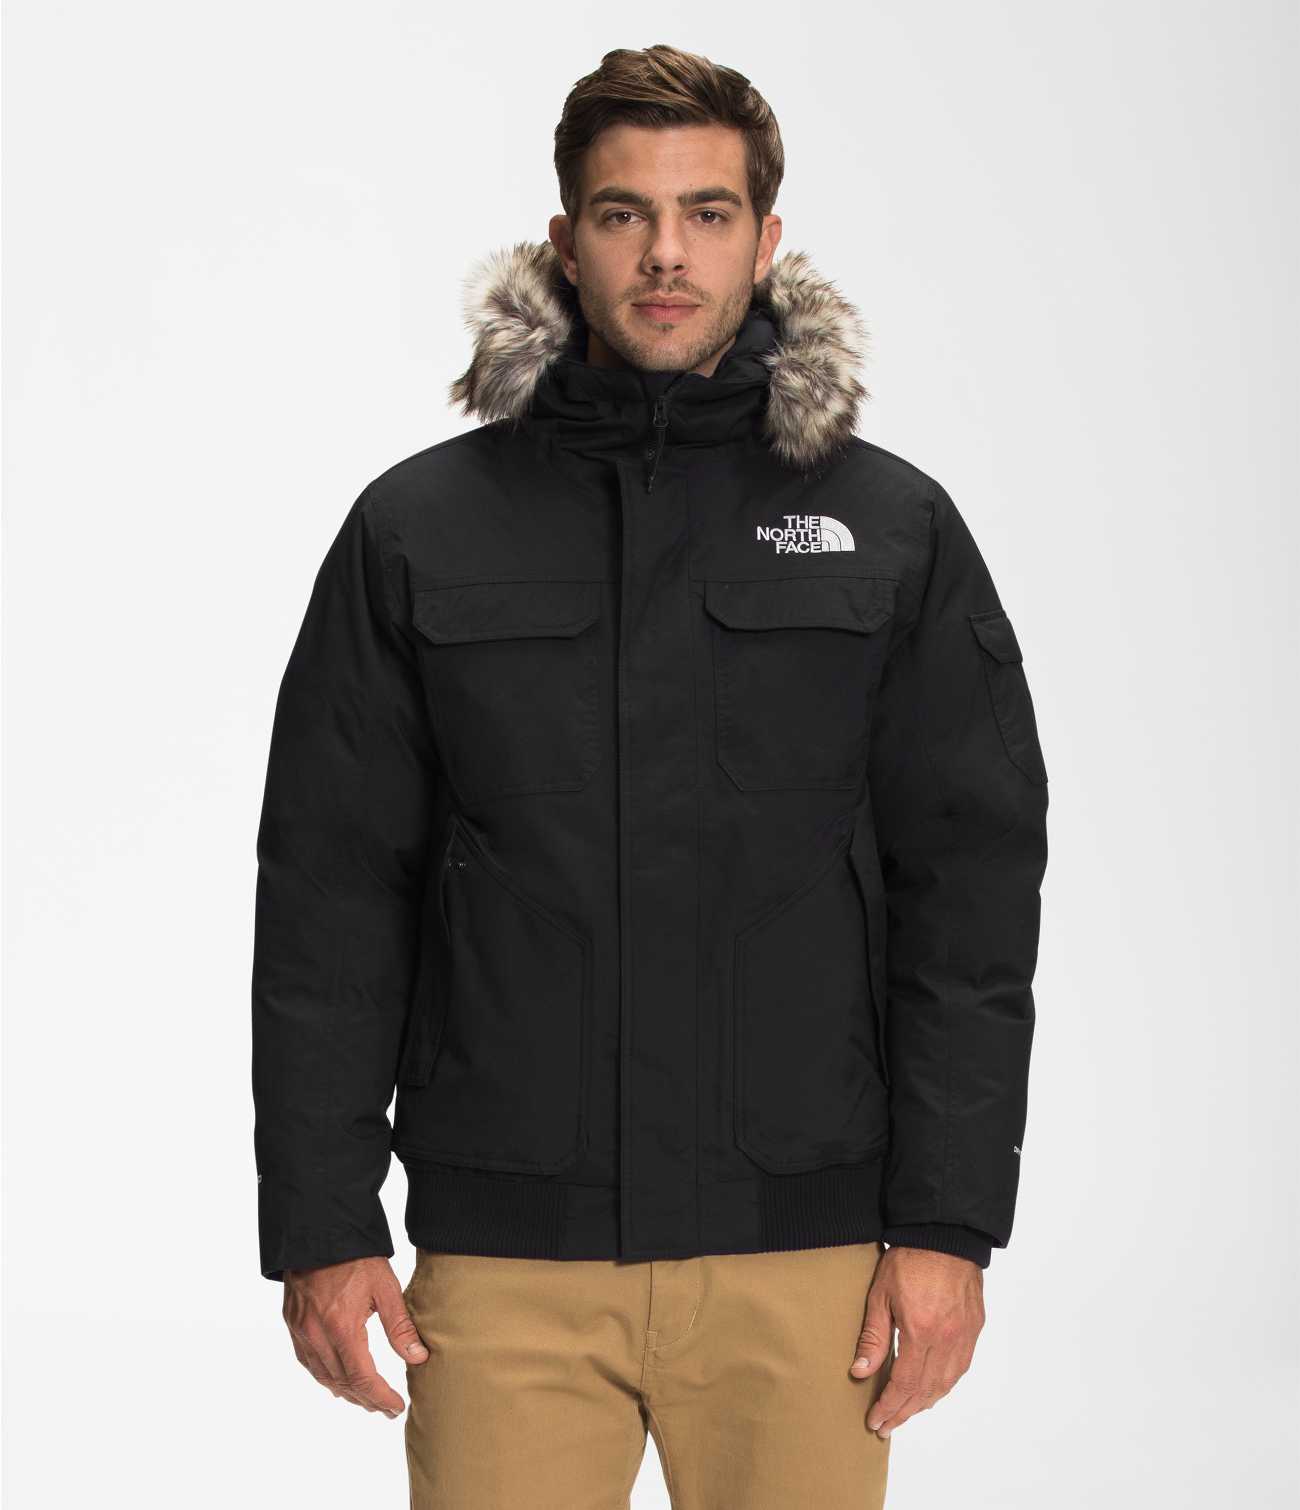 The North Face Gotham Jacket In Black | lupon.gov.ph